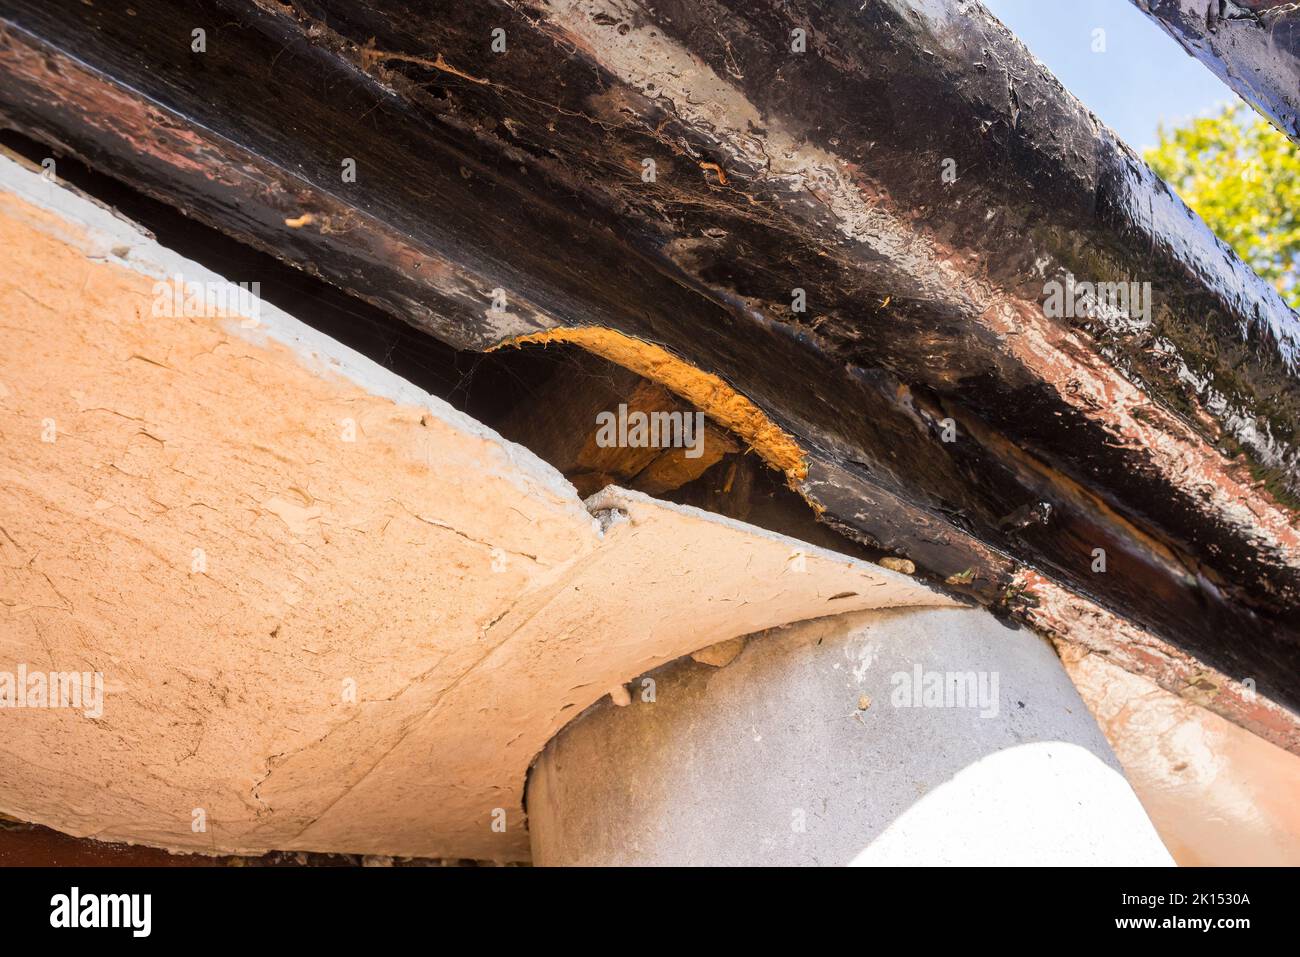 A poorly maintained lath and plaster soffit which has sagged allowing access and further damage by rodents. Stock Photo